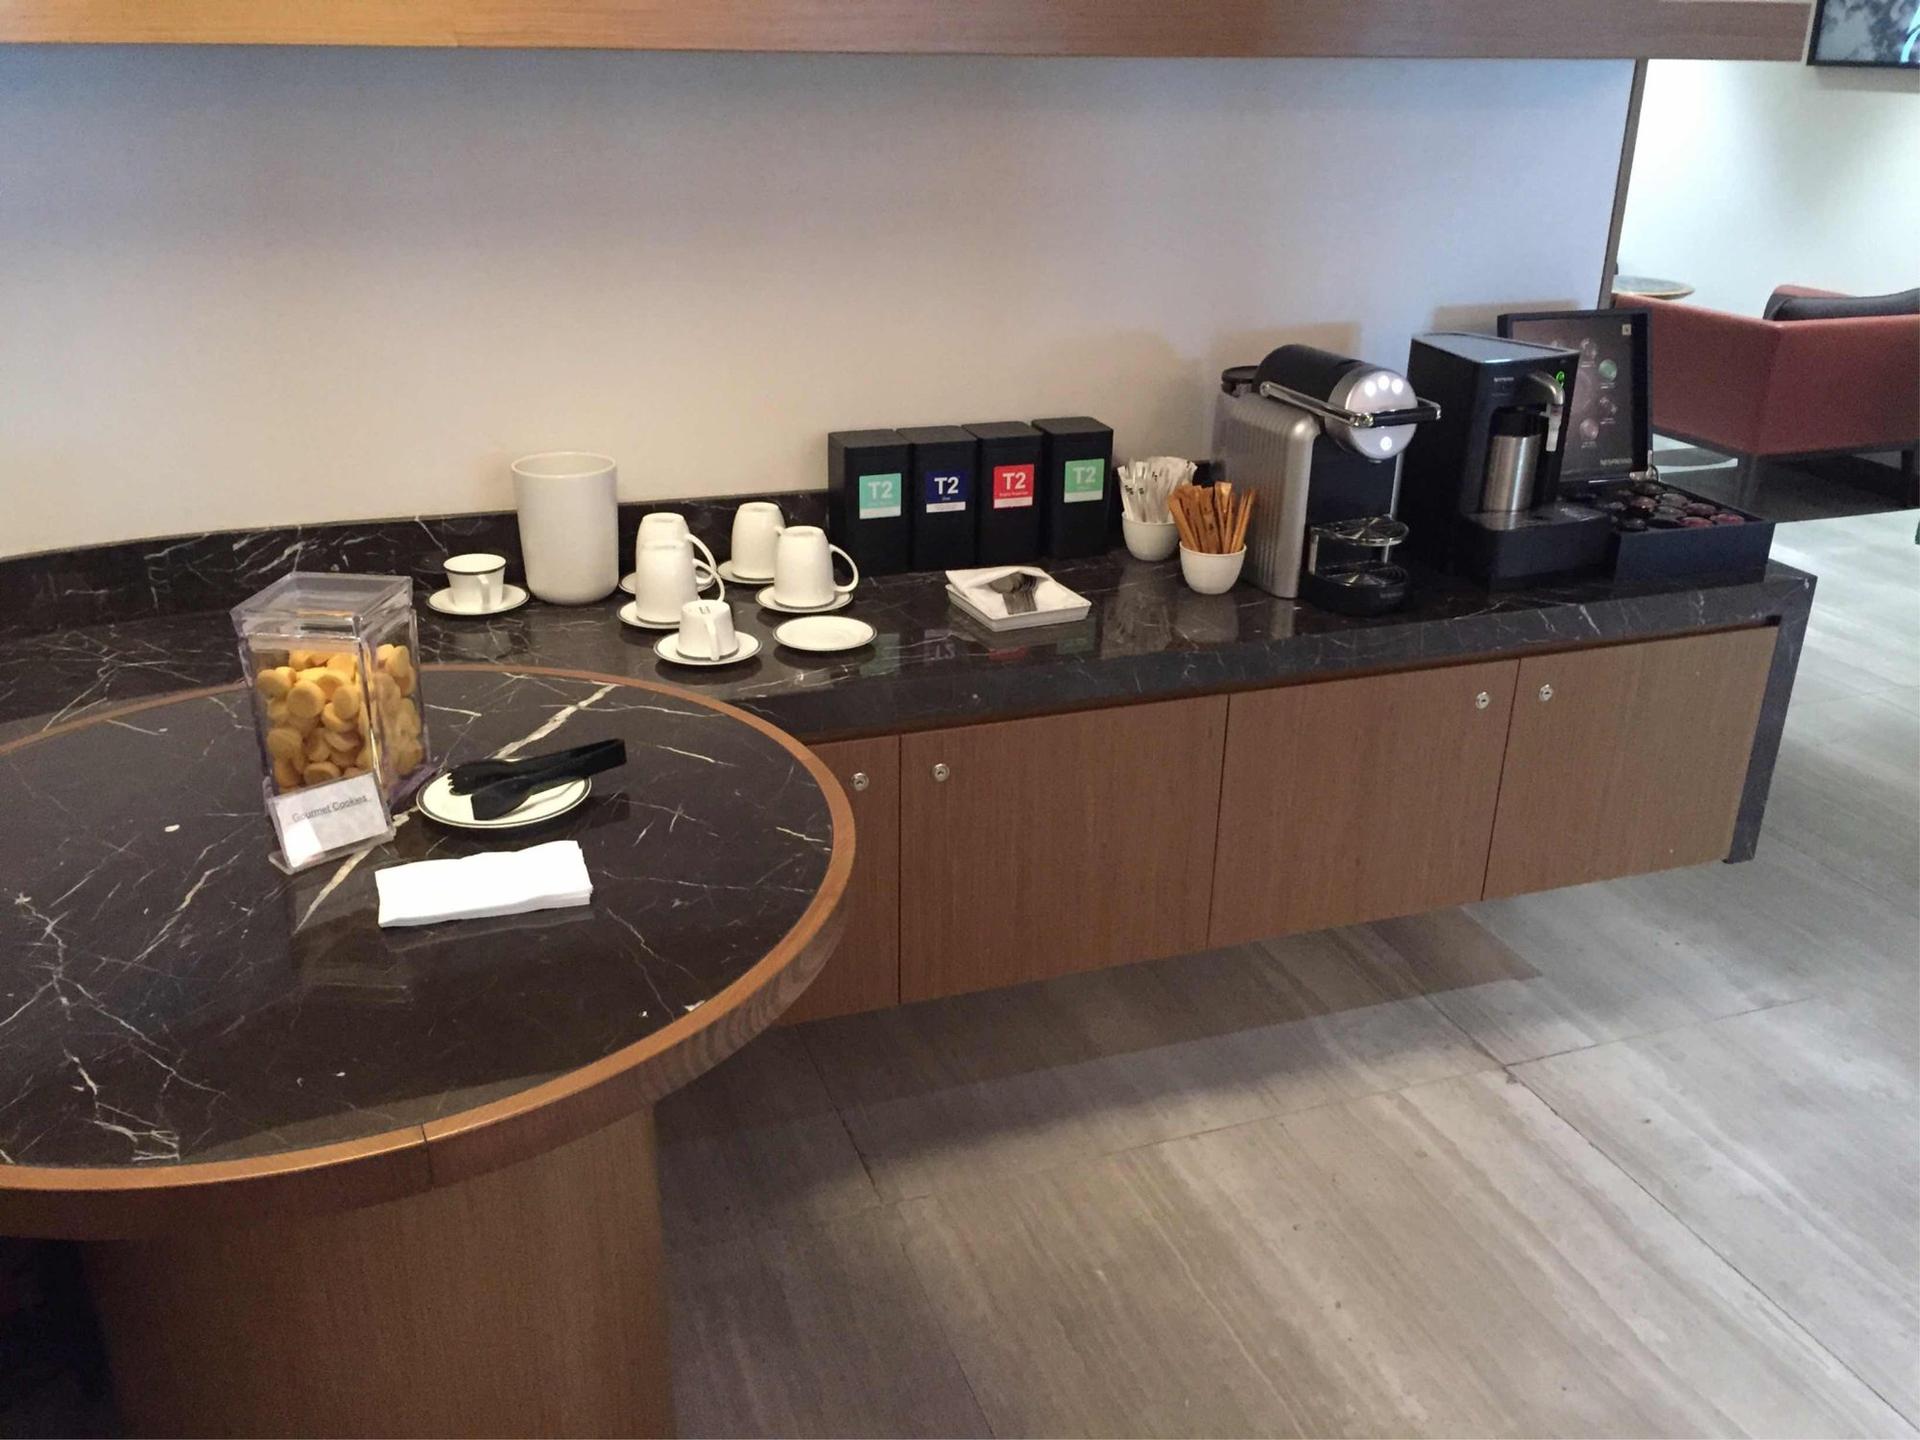 Singapore Airlines SilverKris Business Class Lounge image 15 of 20